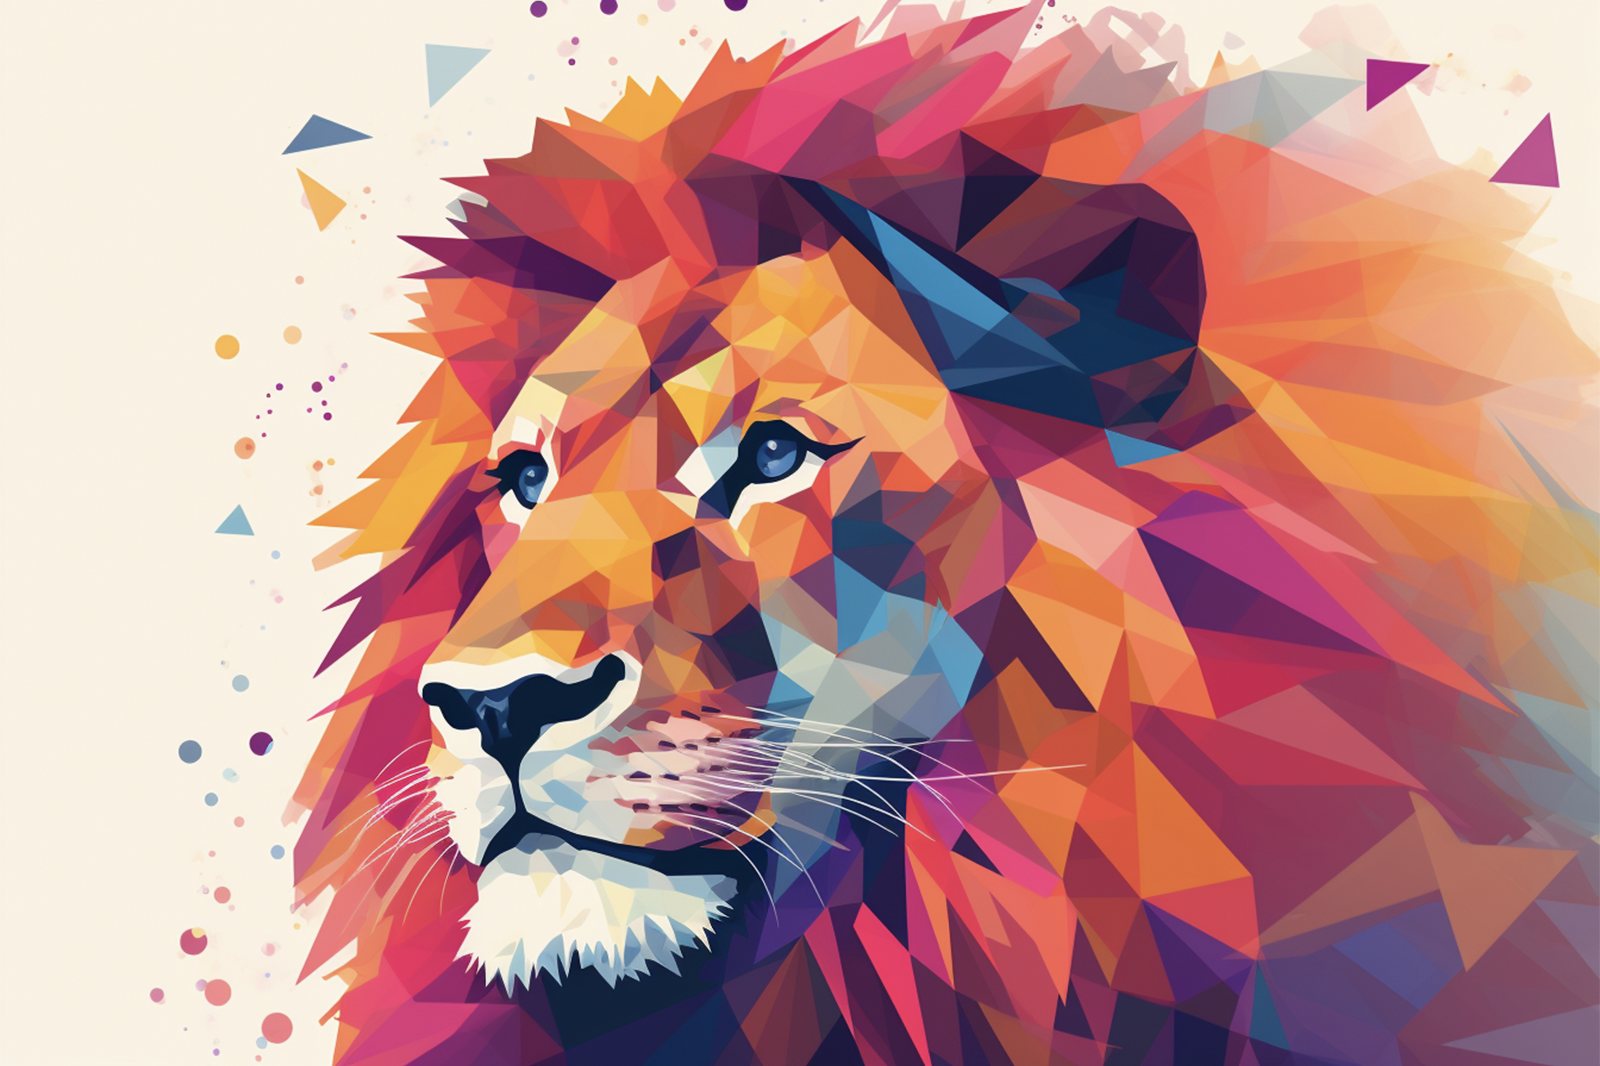 A vibrant and intricate geometric lion head composed of multiple colors, placed against a clean white background